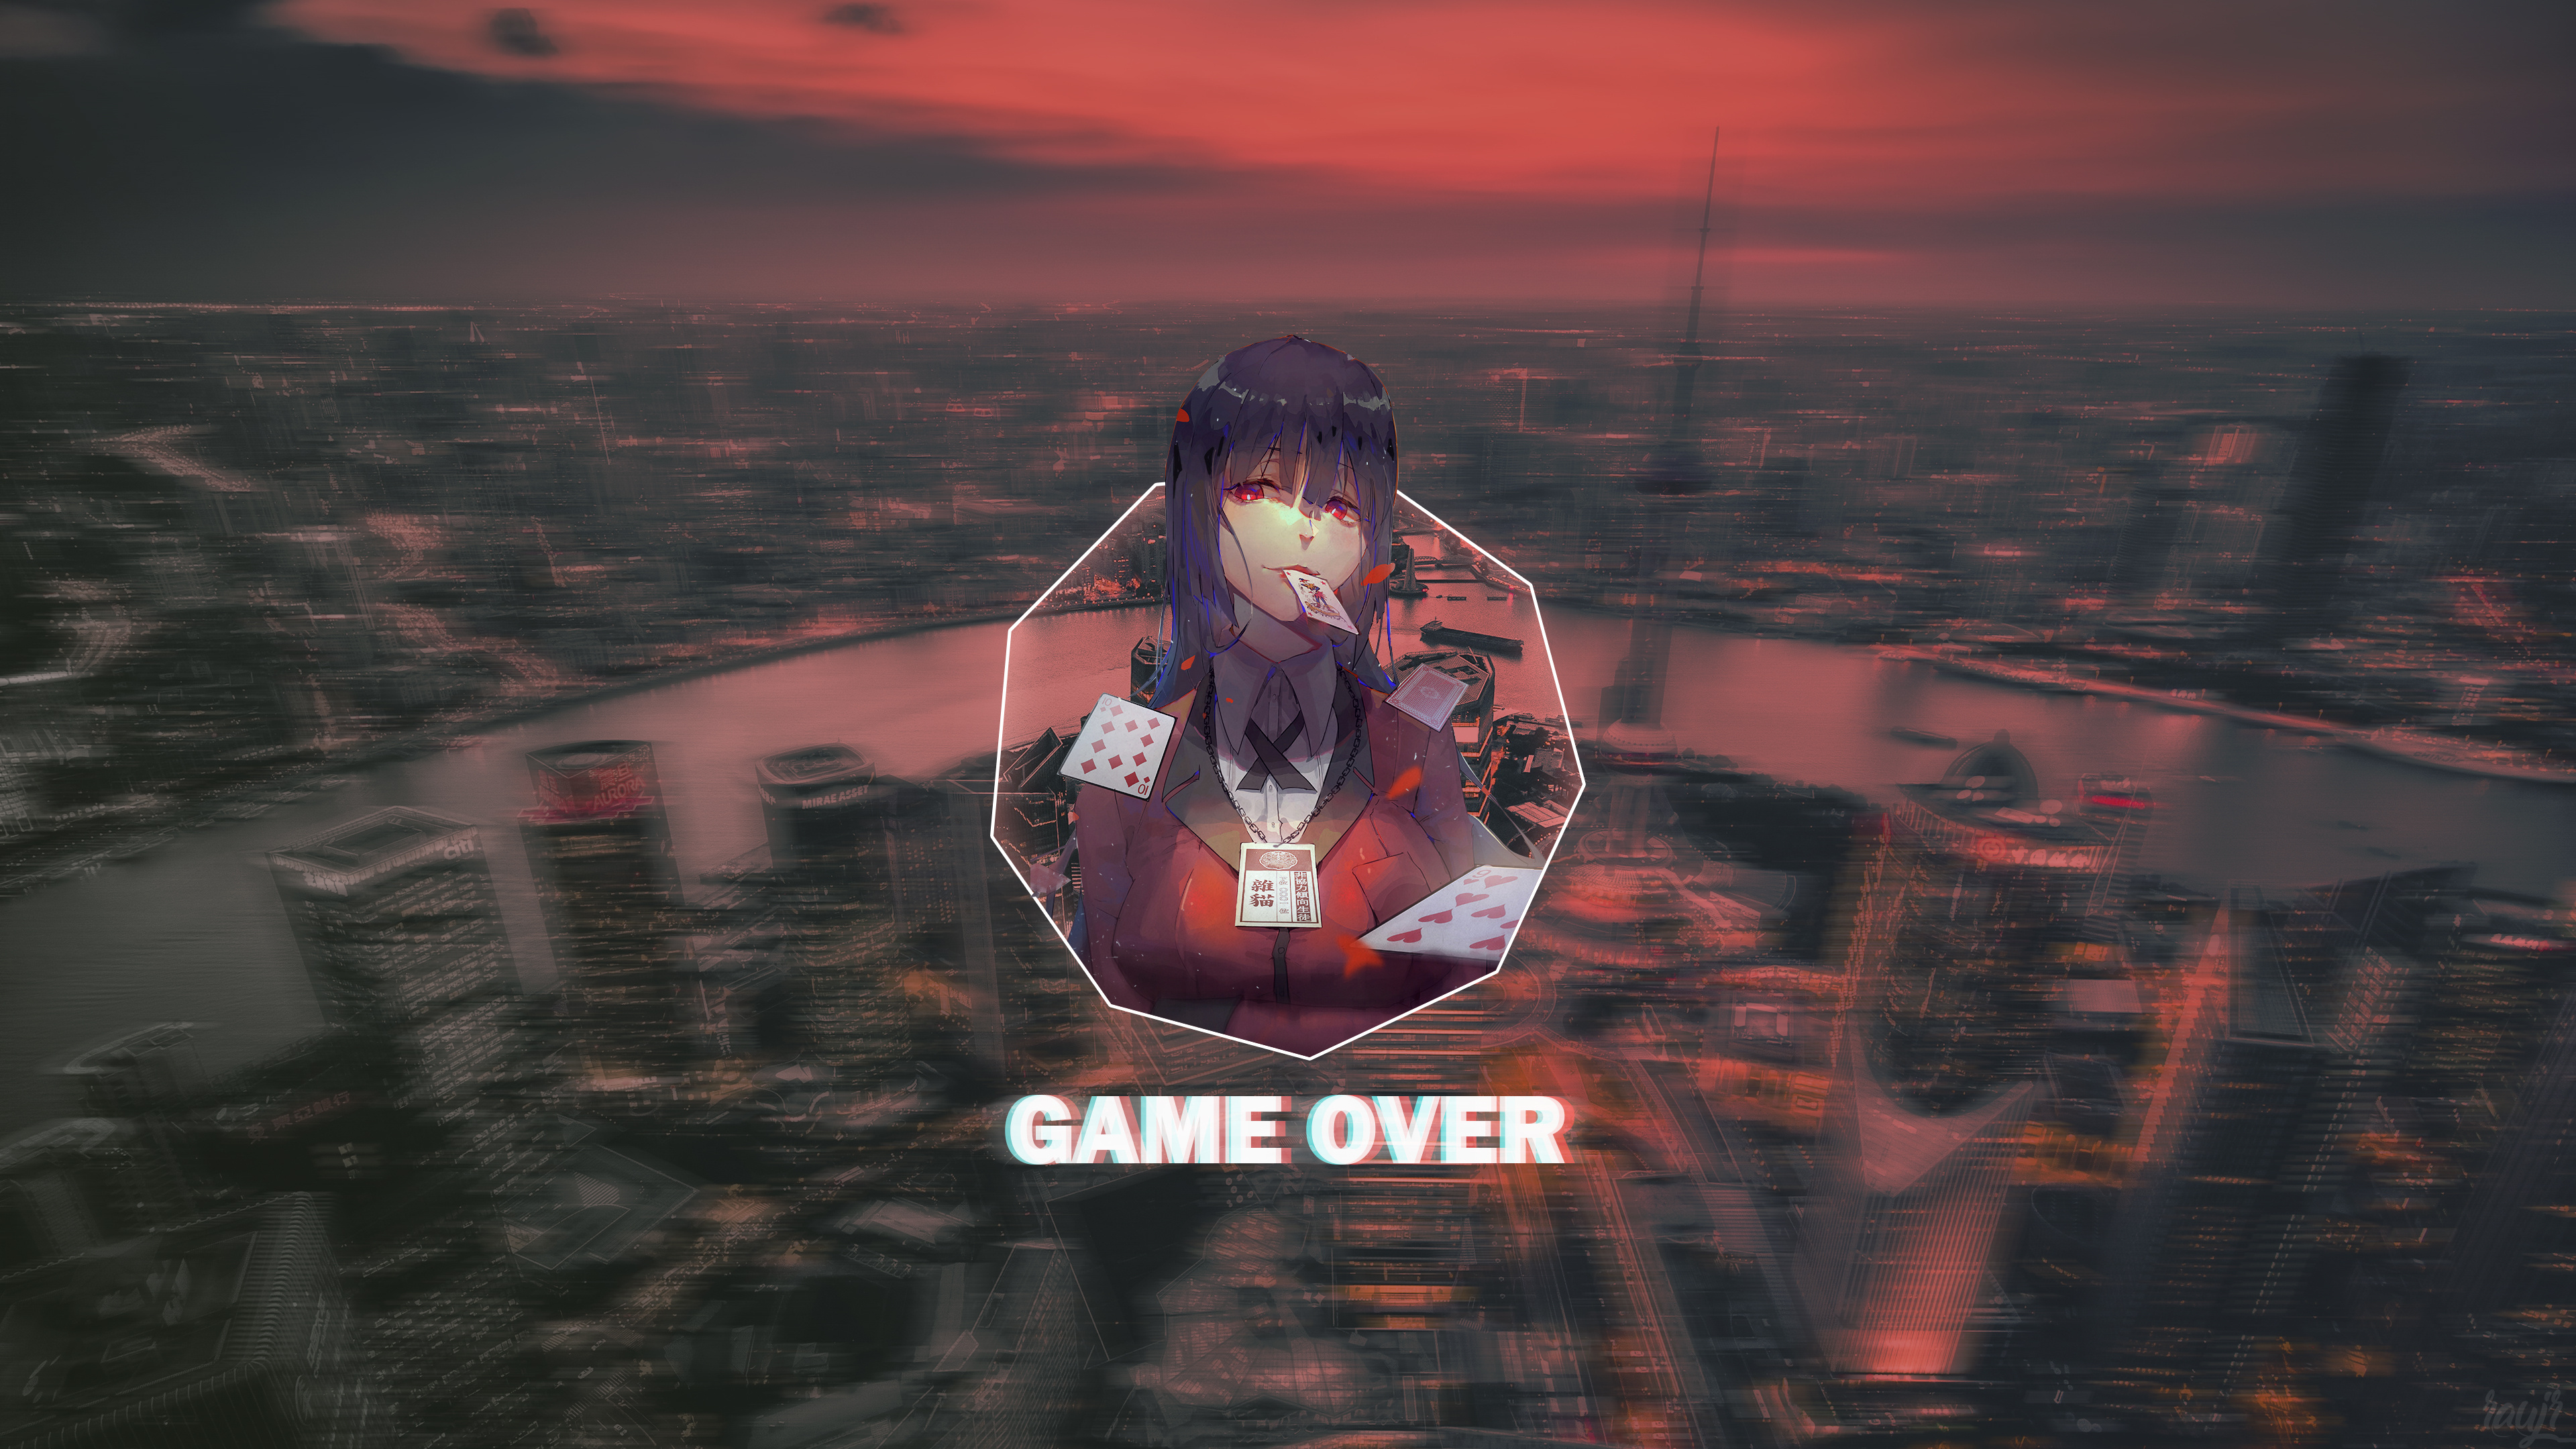 Game Over, Picture in picture, Anime landscape, Red eyes, 3840x2160 4K Desktop